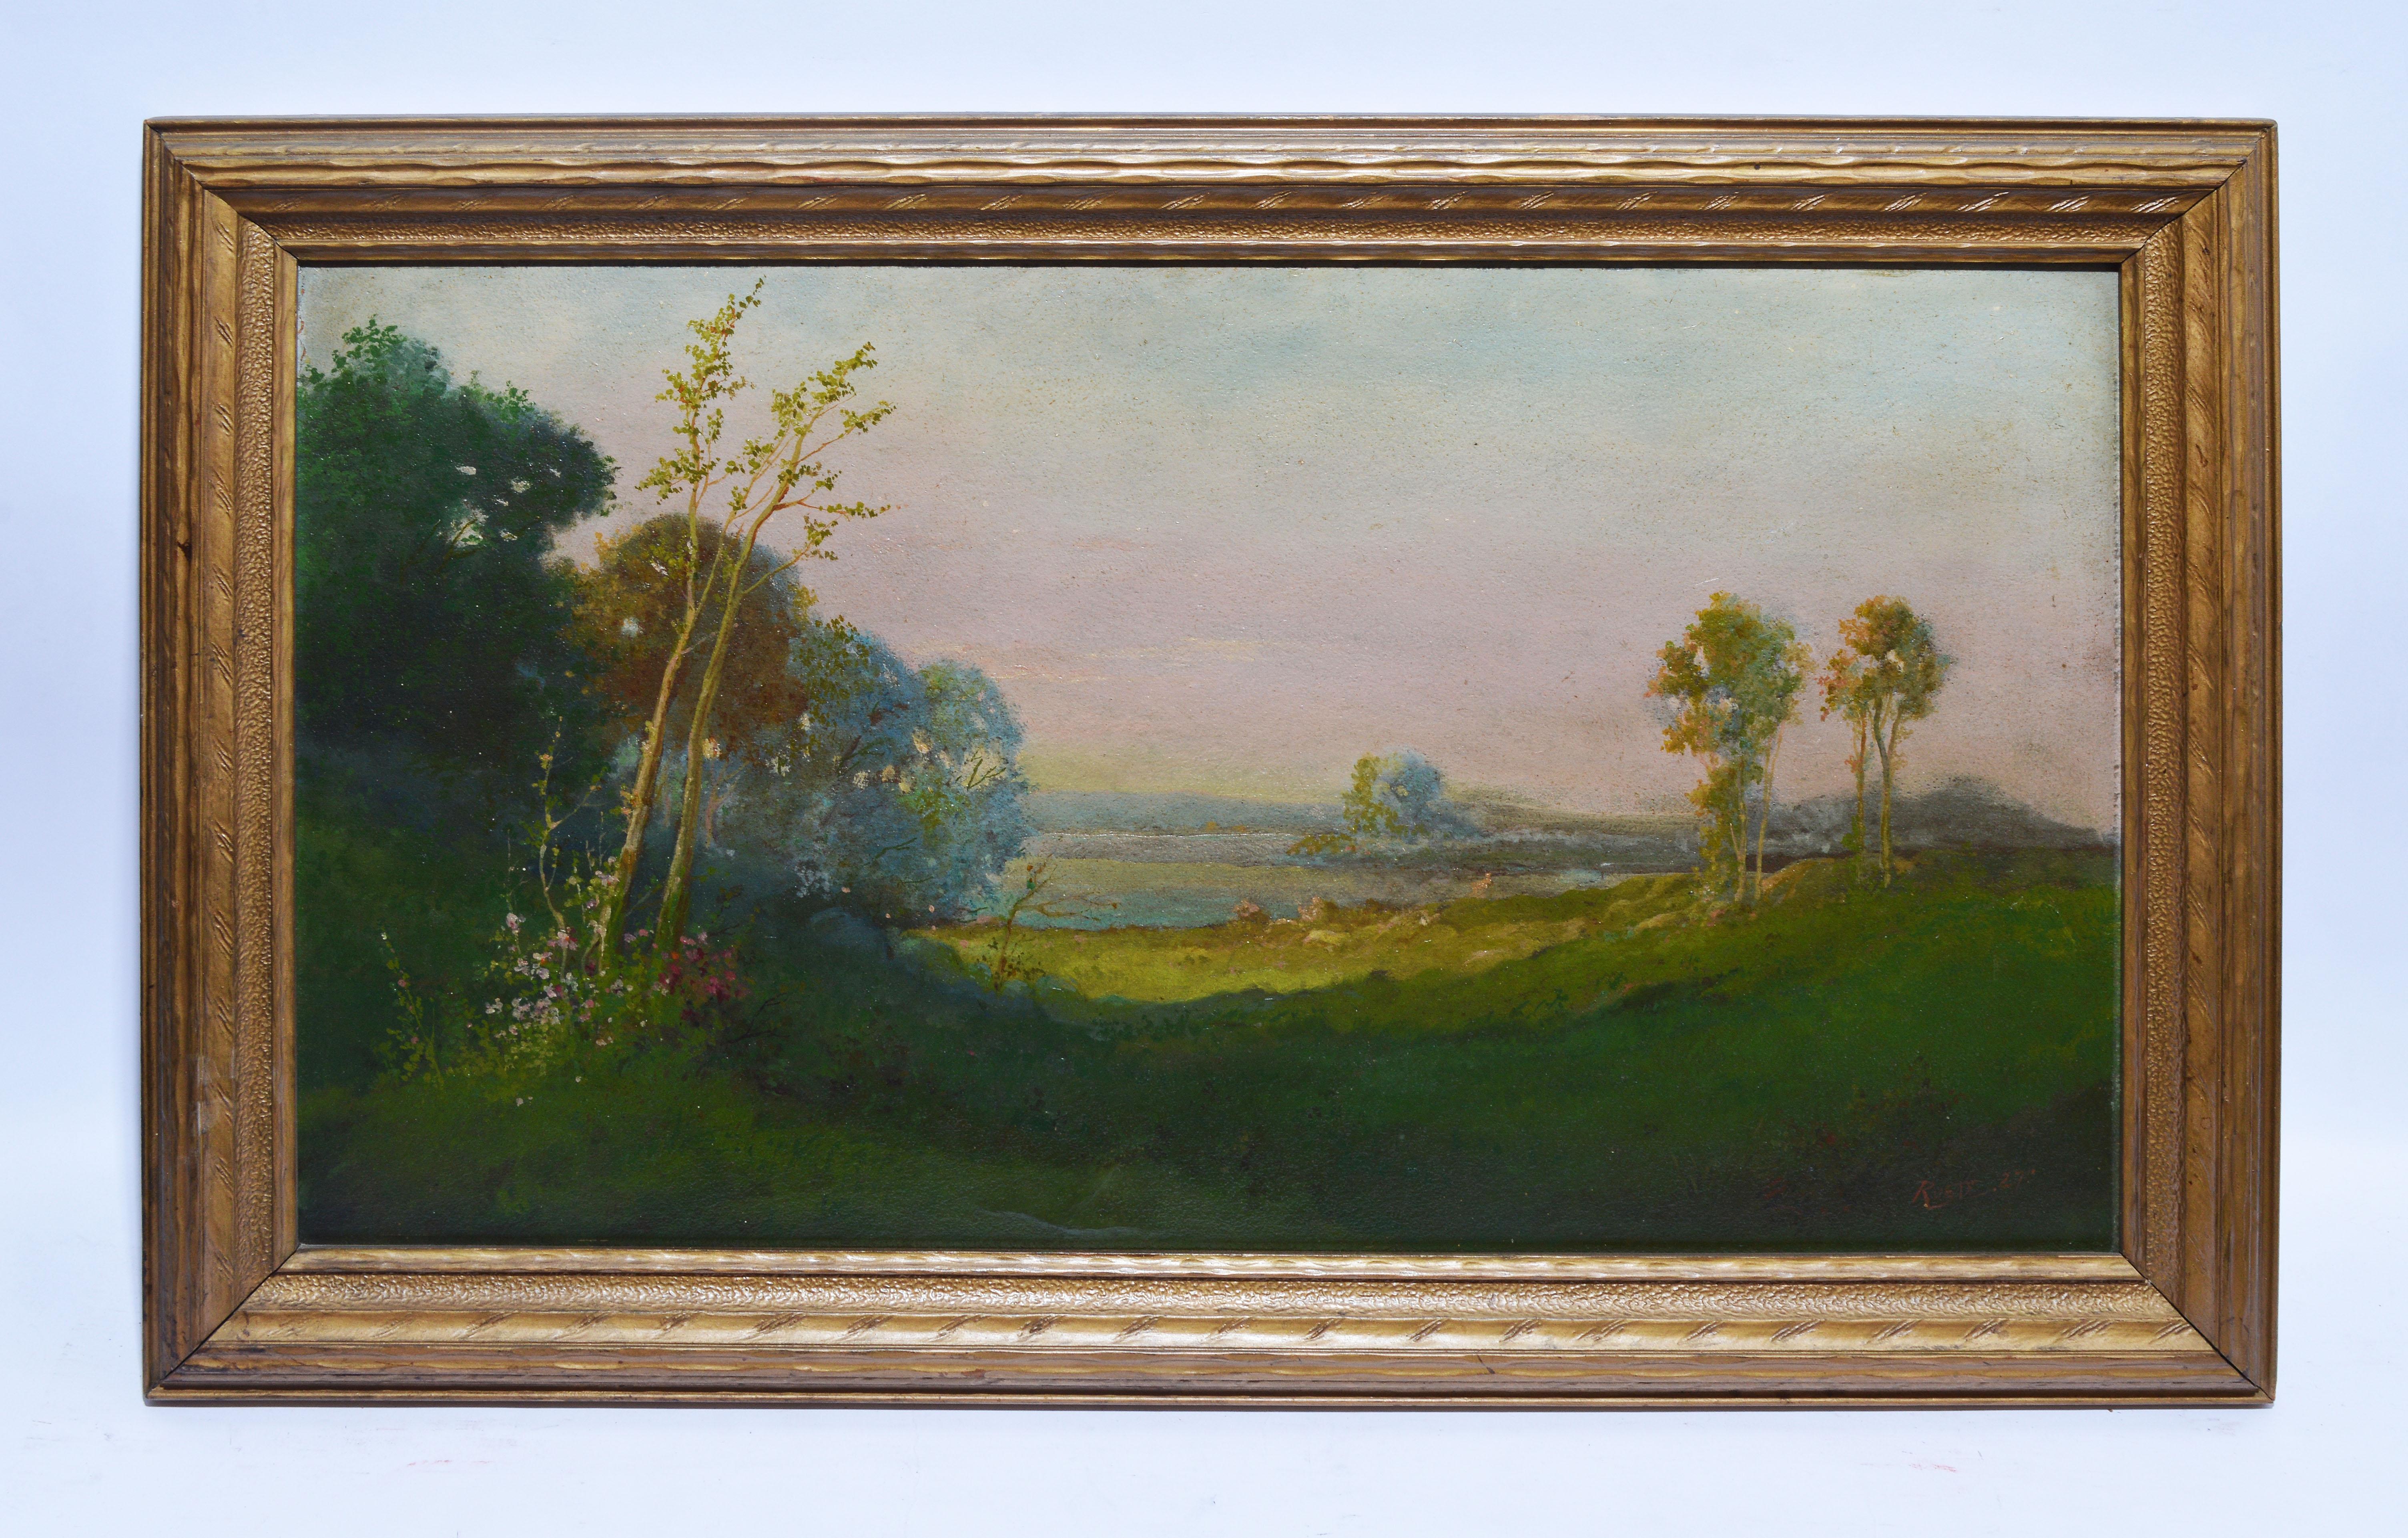 Vintage California Sunset Valley Signed Landscape Oil Painting (Braun), Figurative Painting, von Unknown